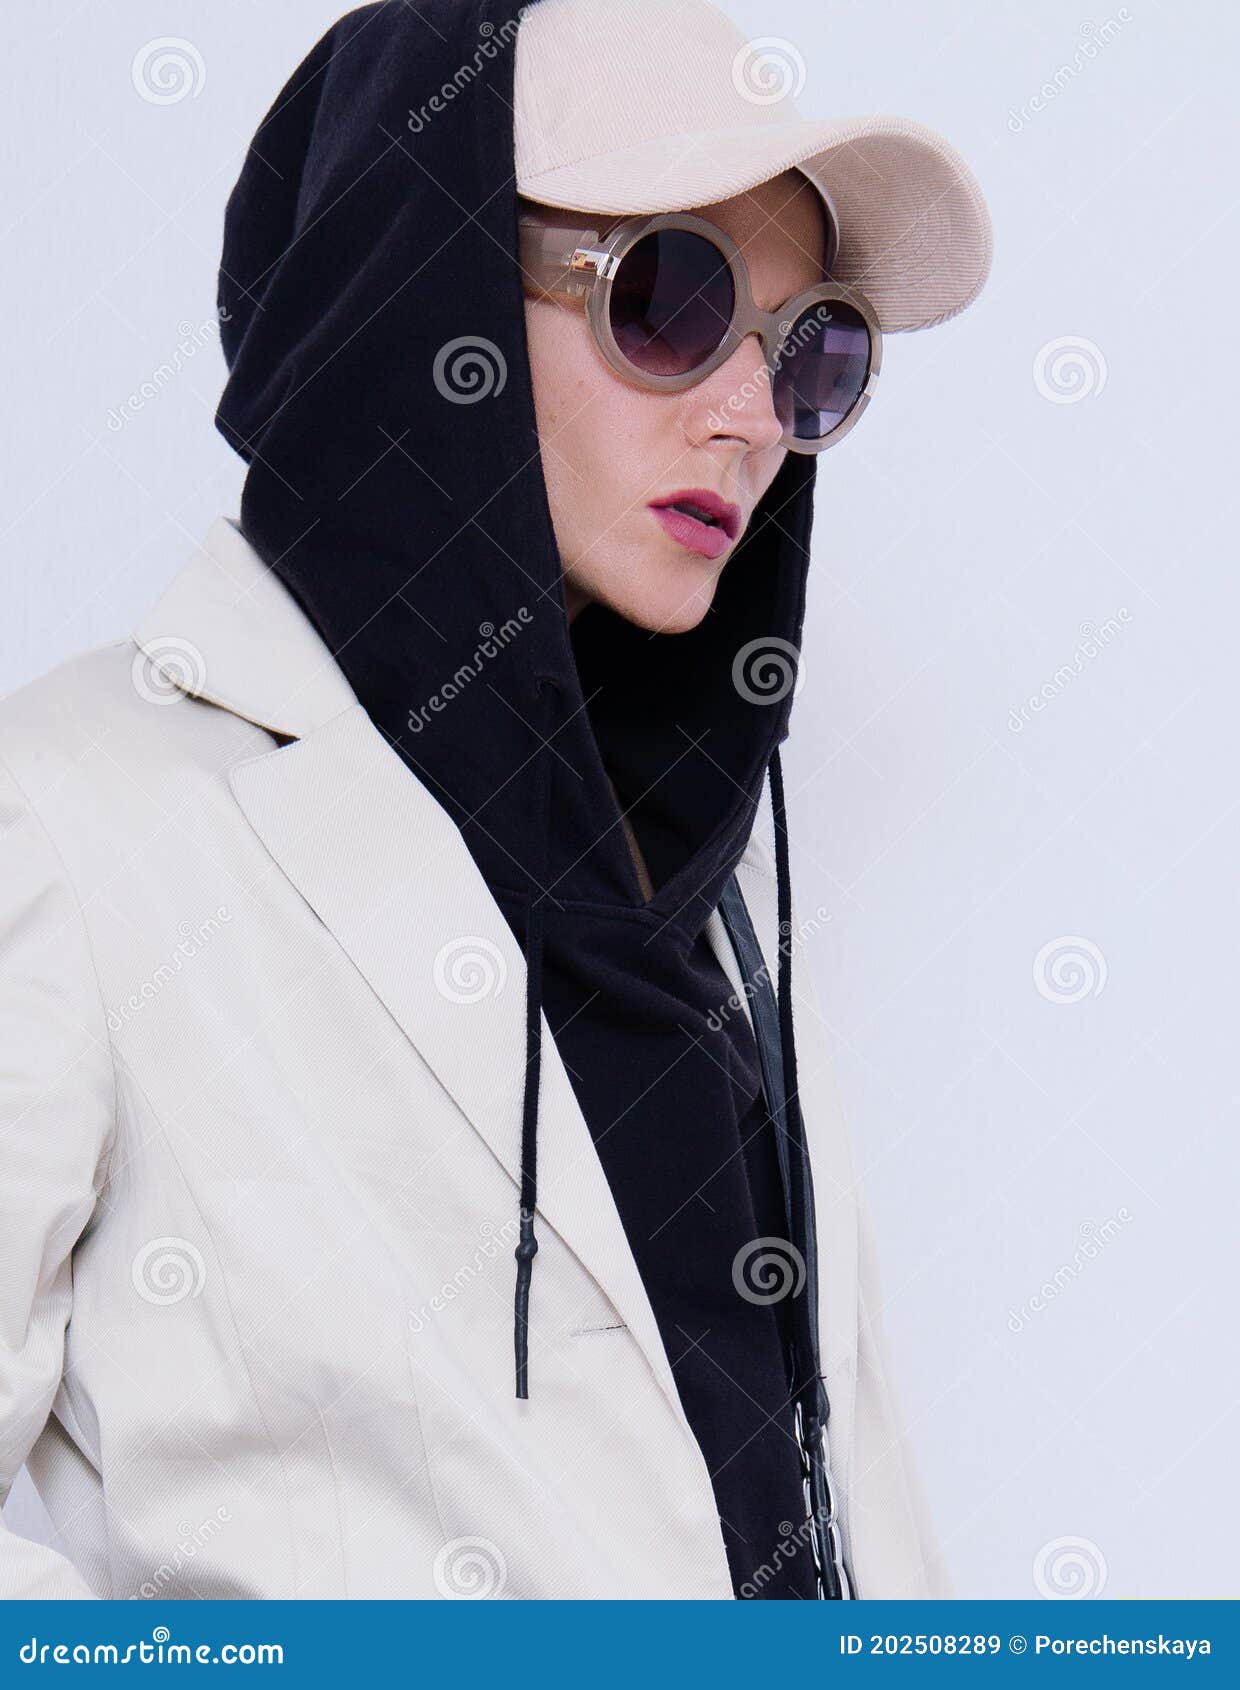 Girl in White Studio. Trendy Beige Casual Outfit with Black Hoodie Accent.  Cap, Sunglasses, Denim Suit Jacket and Pants Stock Image - Image of female,  minimal: 202508289